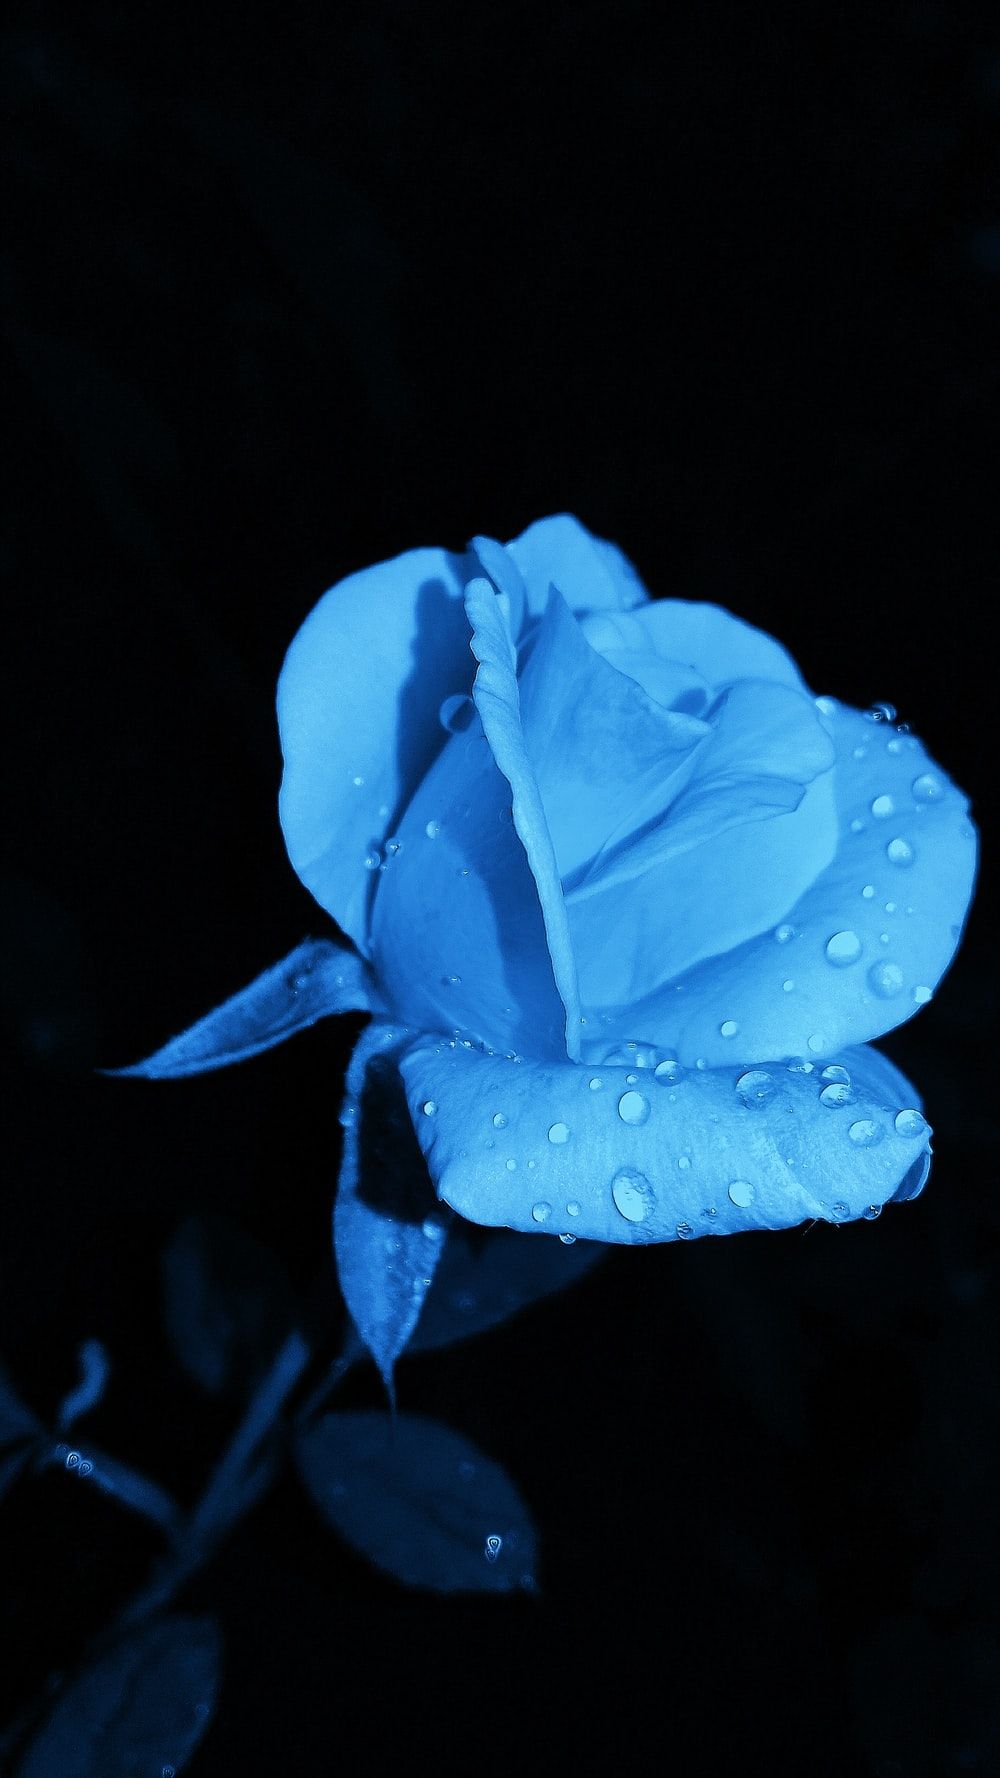 Light Blue Roses Wallpapers - Wallpaper Cave